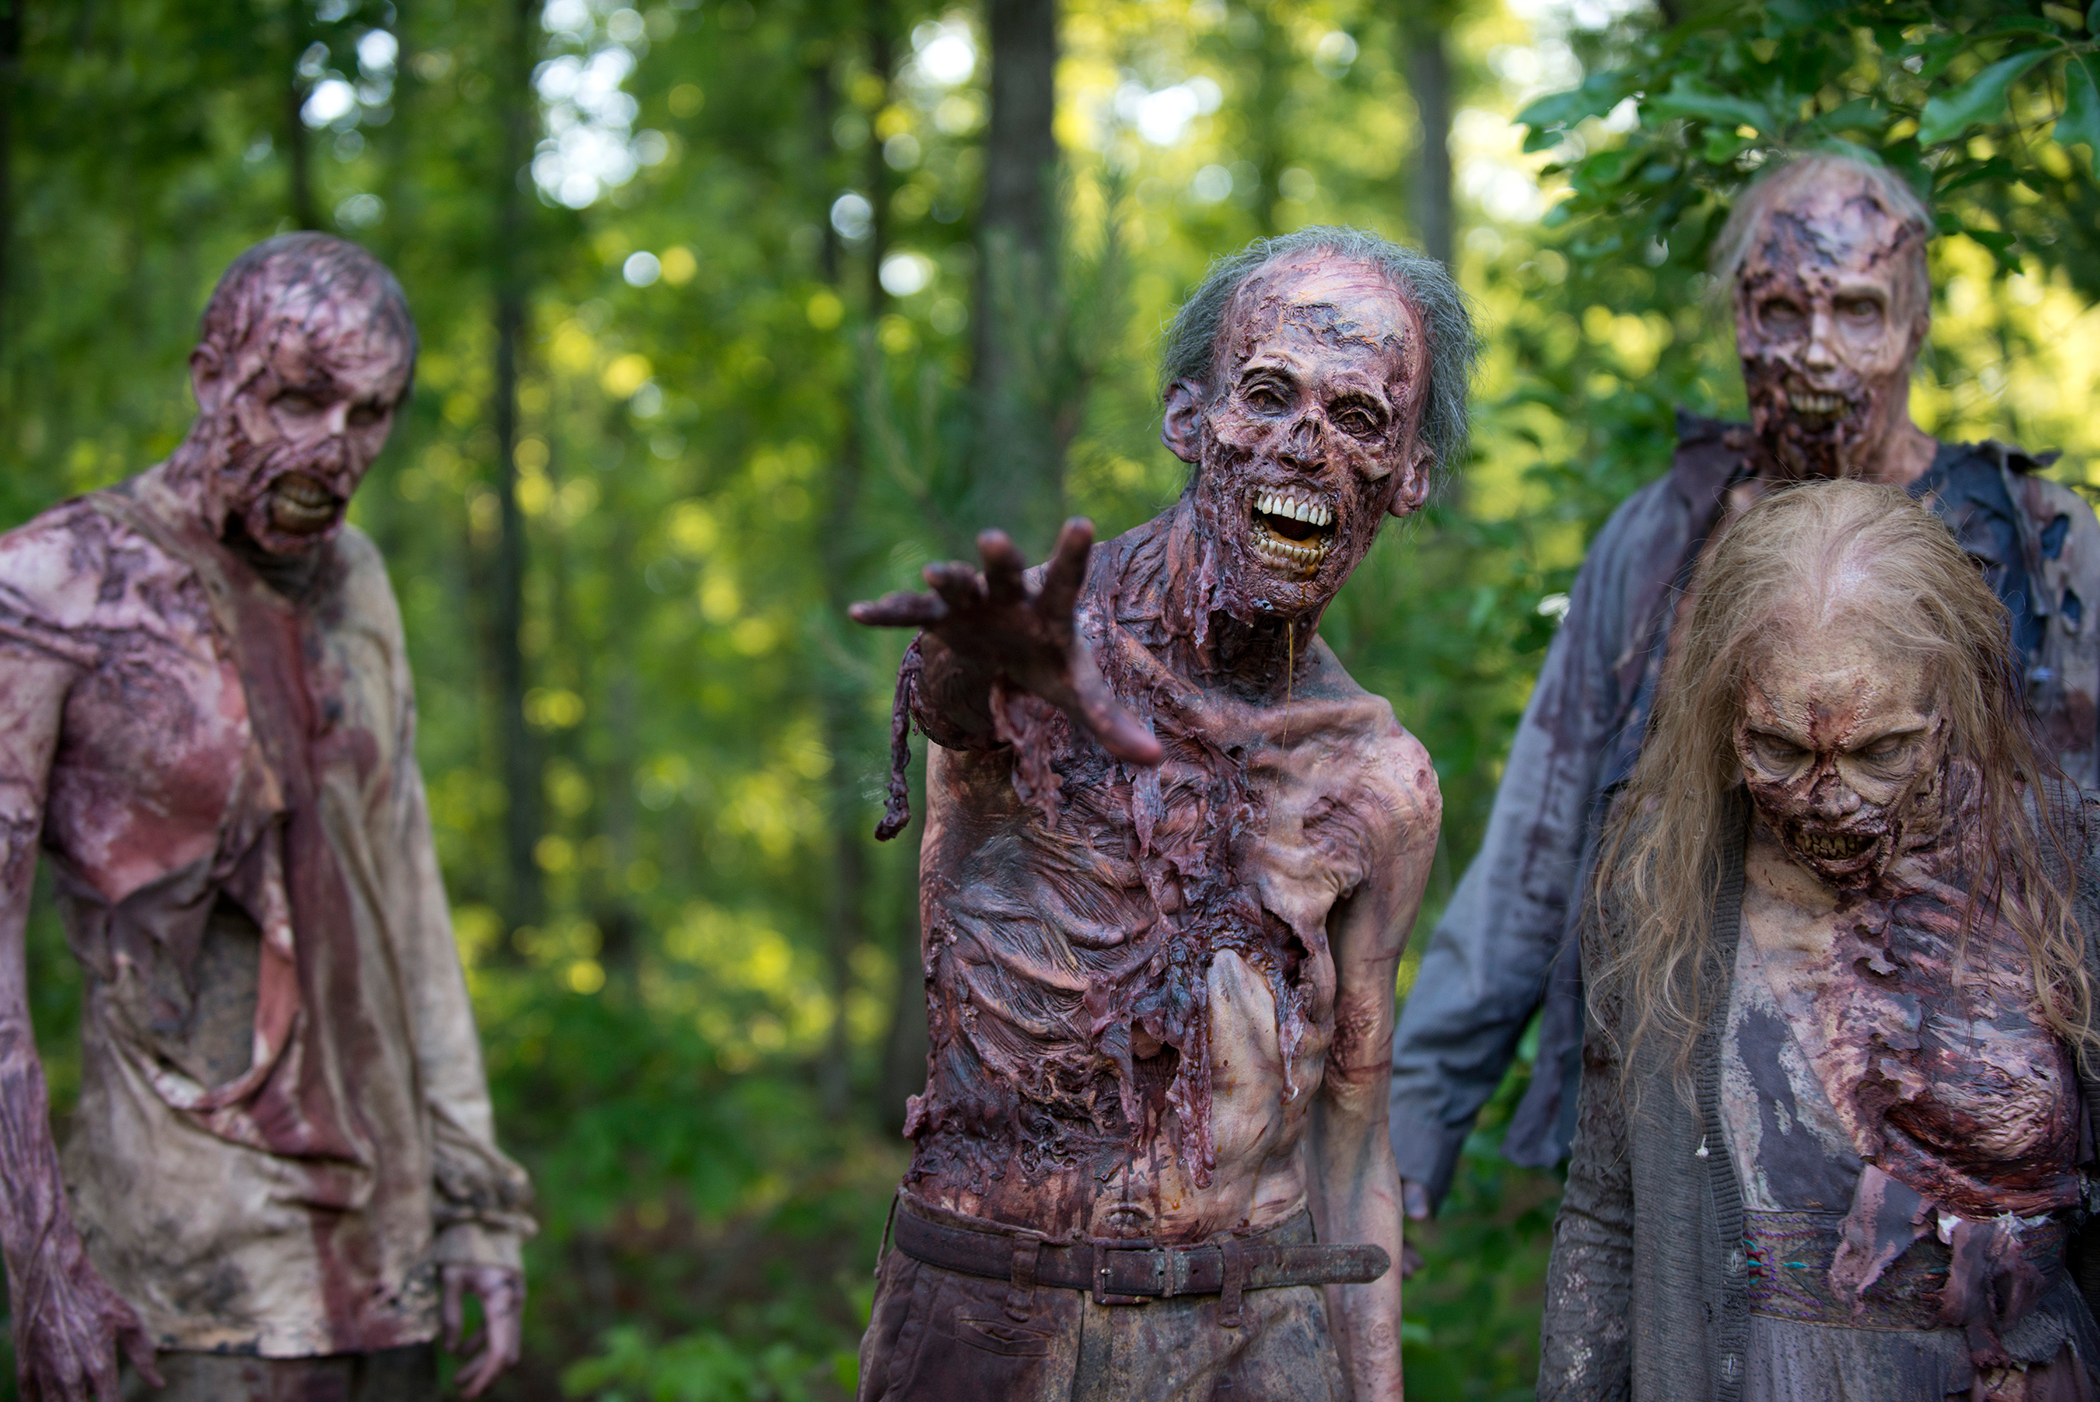 How Much a Zombie Apocalypse Survival Kit Costs